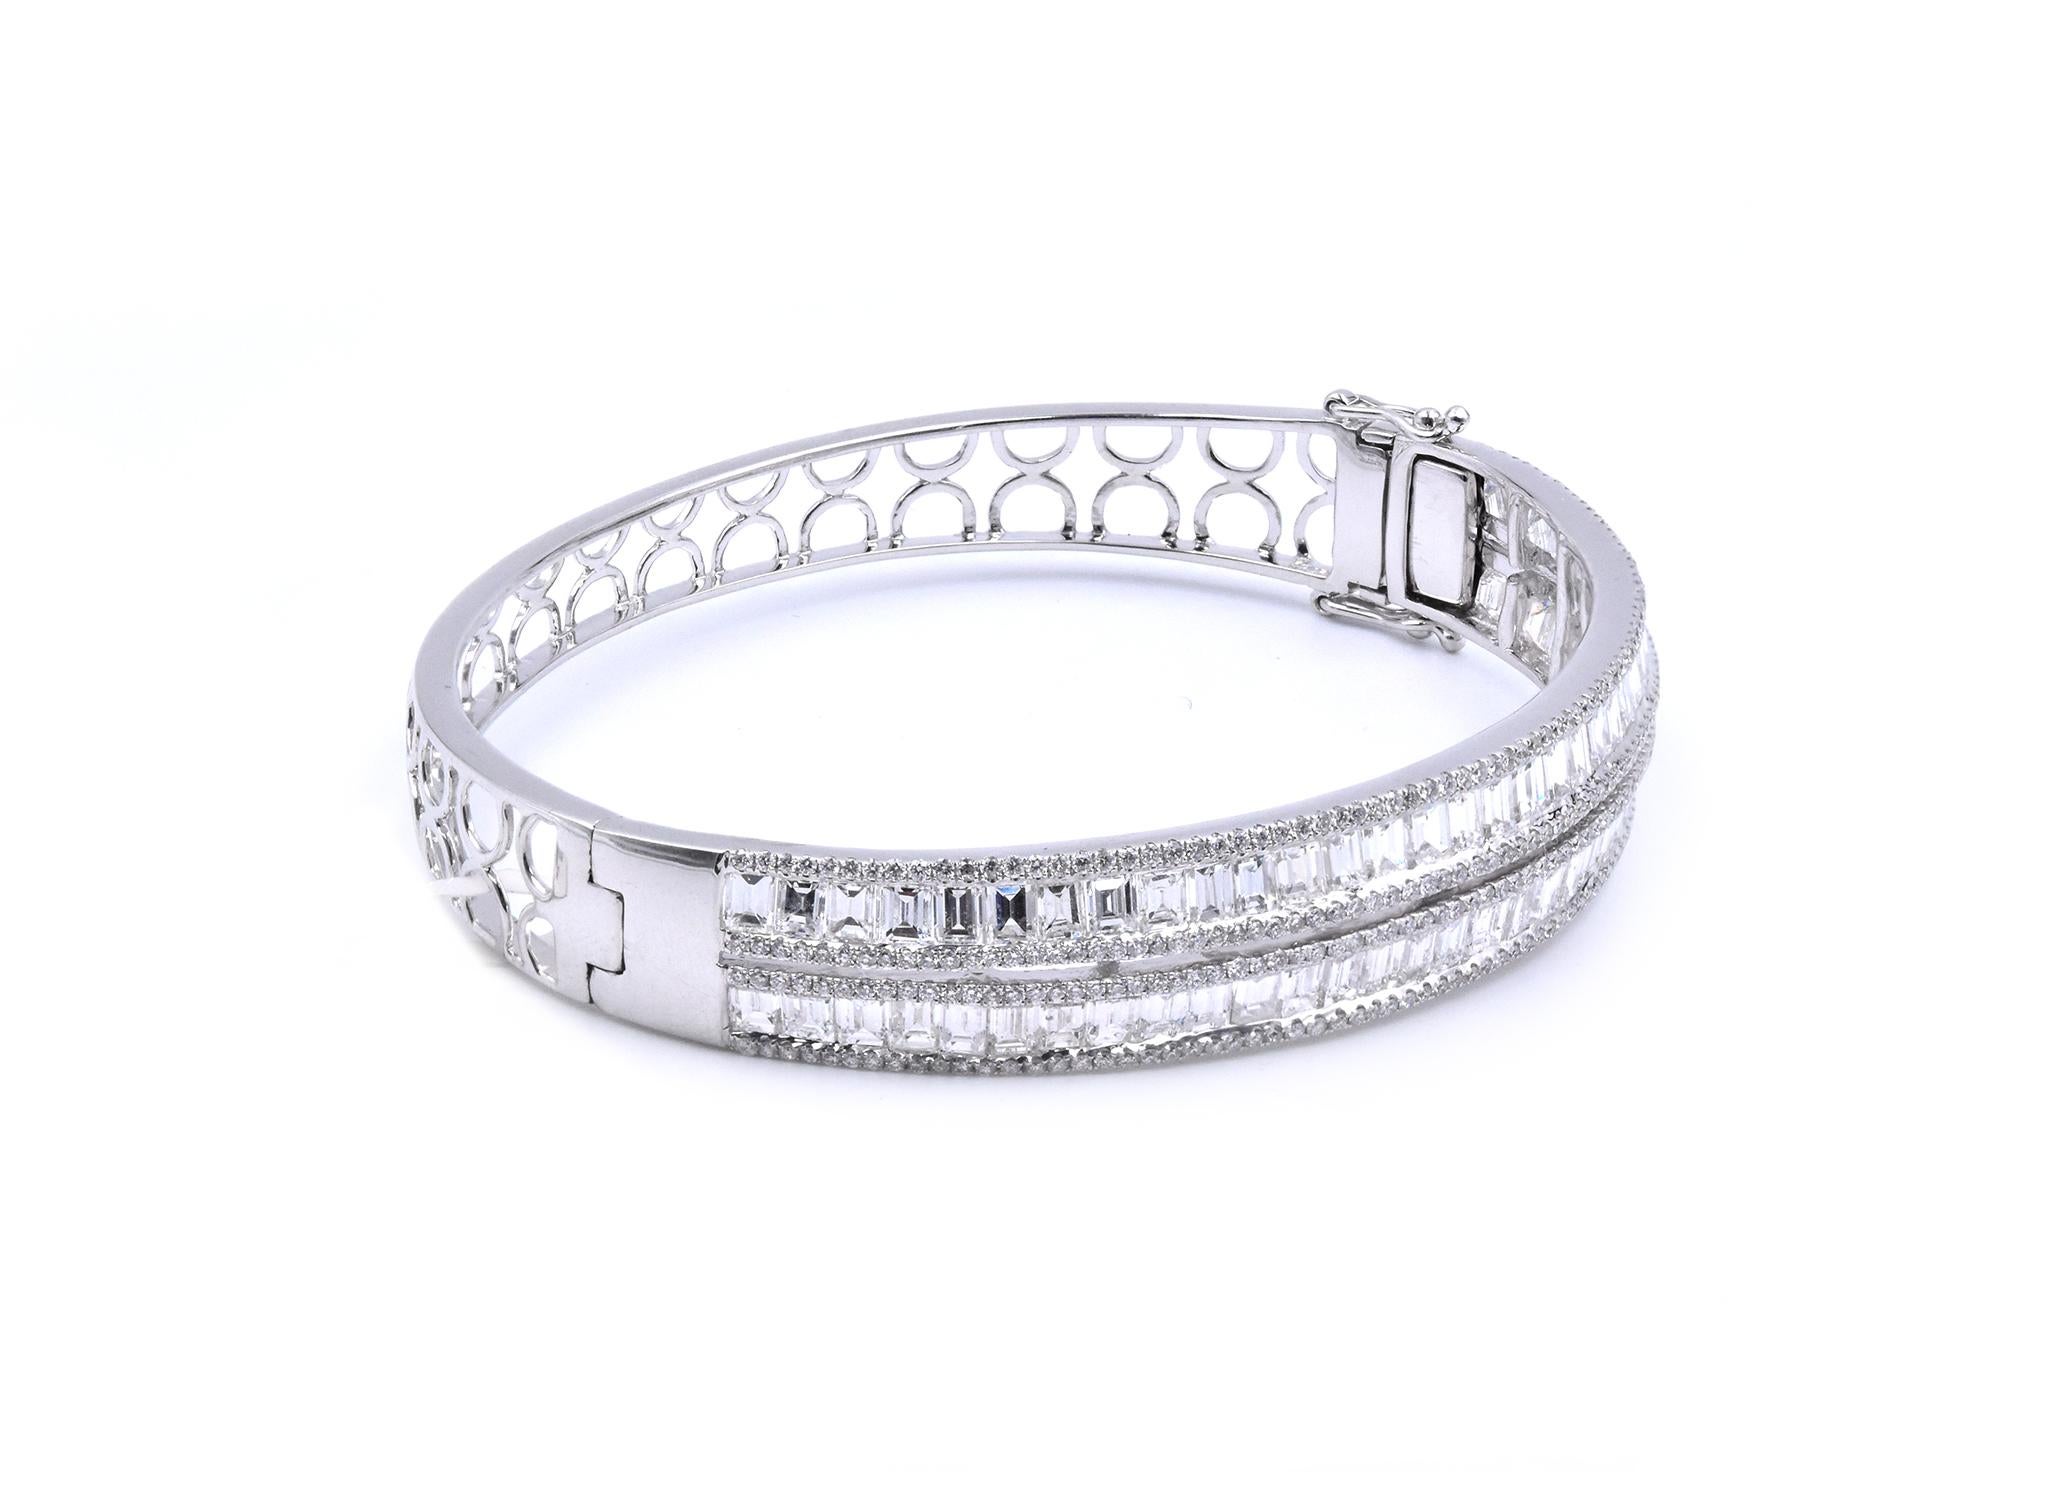 Material: 18K white gold
Diamonds: 398 round and baguette cut = 7.86cttw
Color: G
Clarity: SI1
Dimensions: bracelet will fit up to a 6.5-inch wrist
Weight: 19.07 grams
